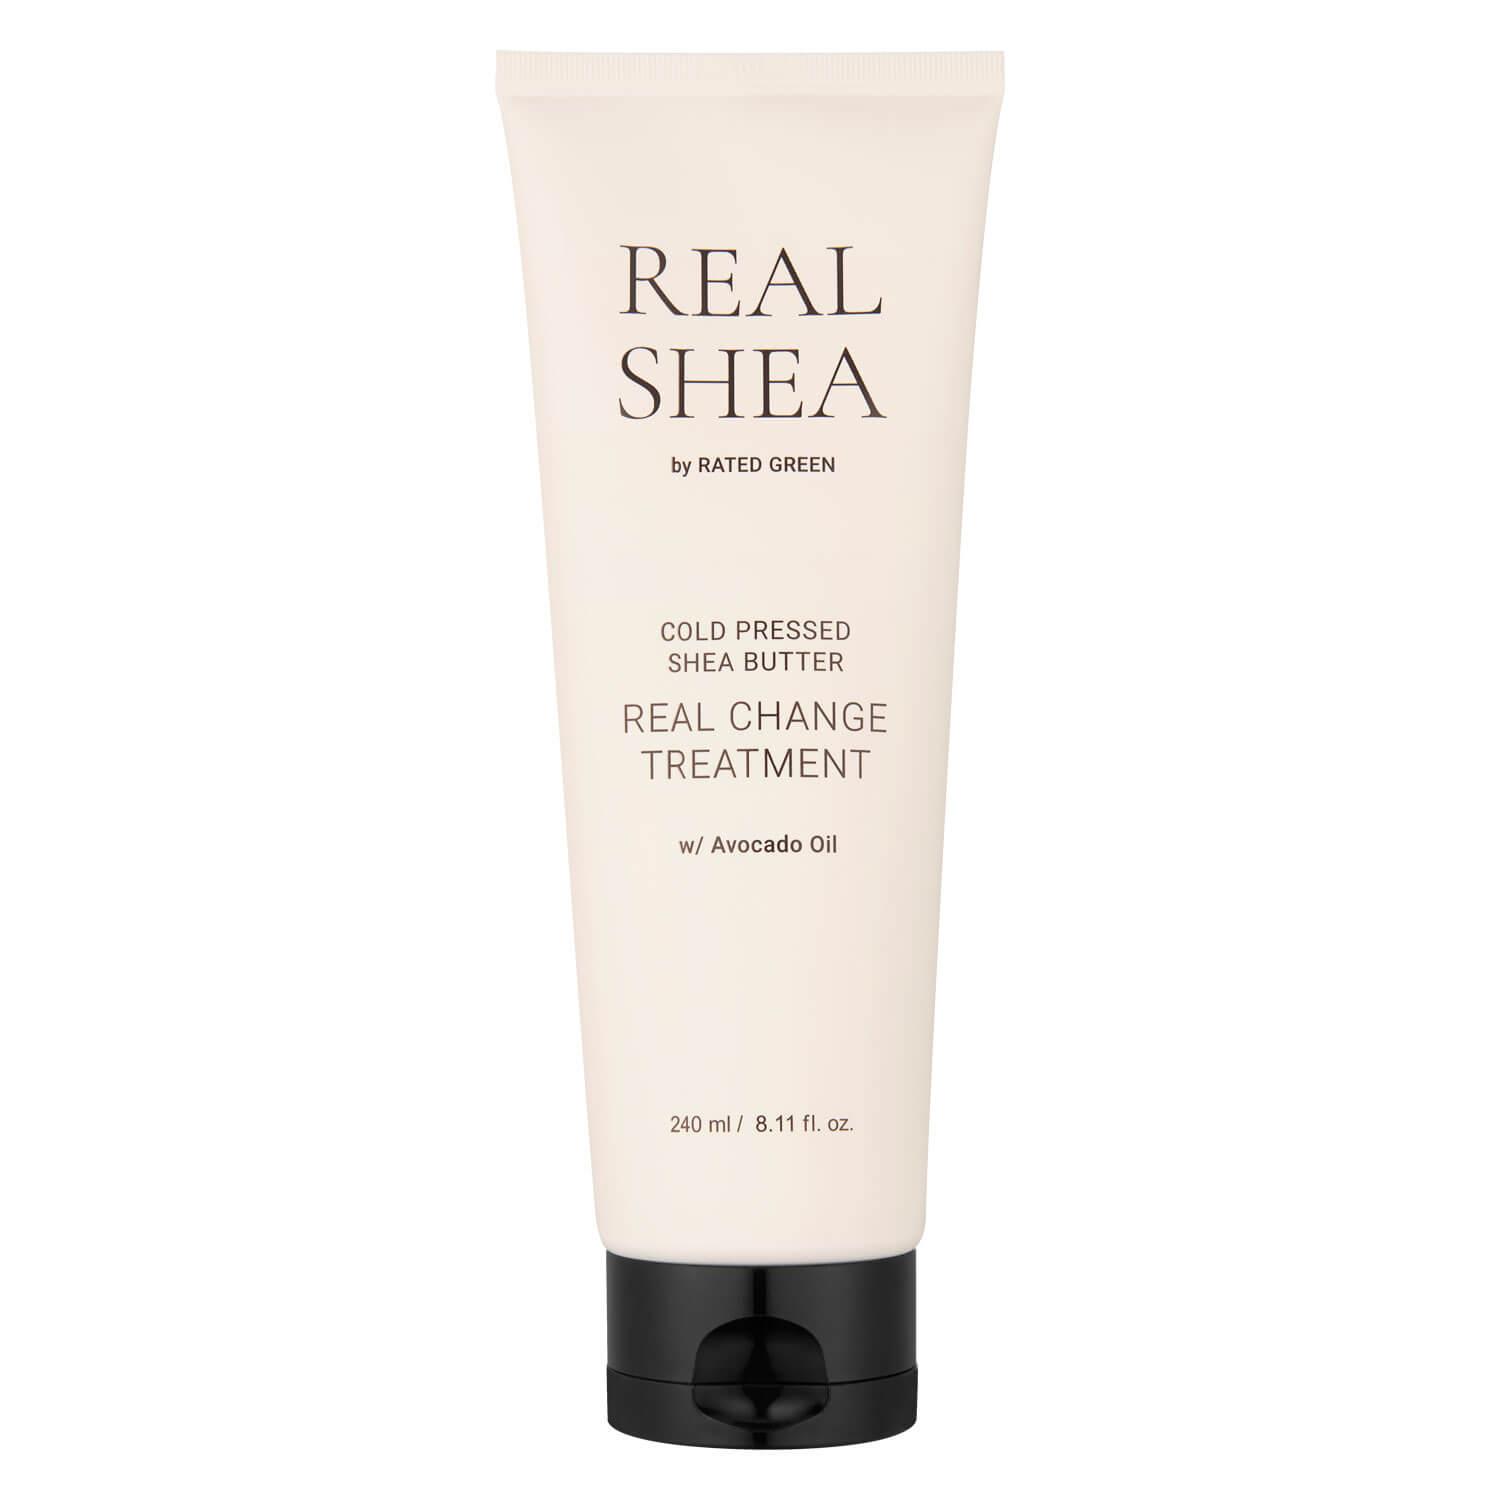 RATED GREEN - Real Shea Real Change Treatment